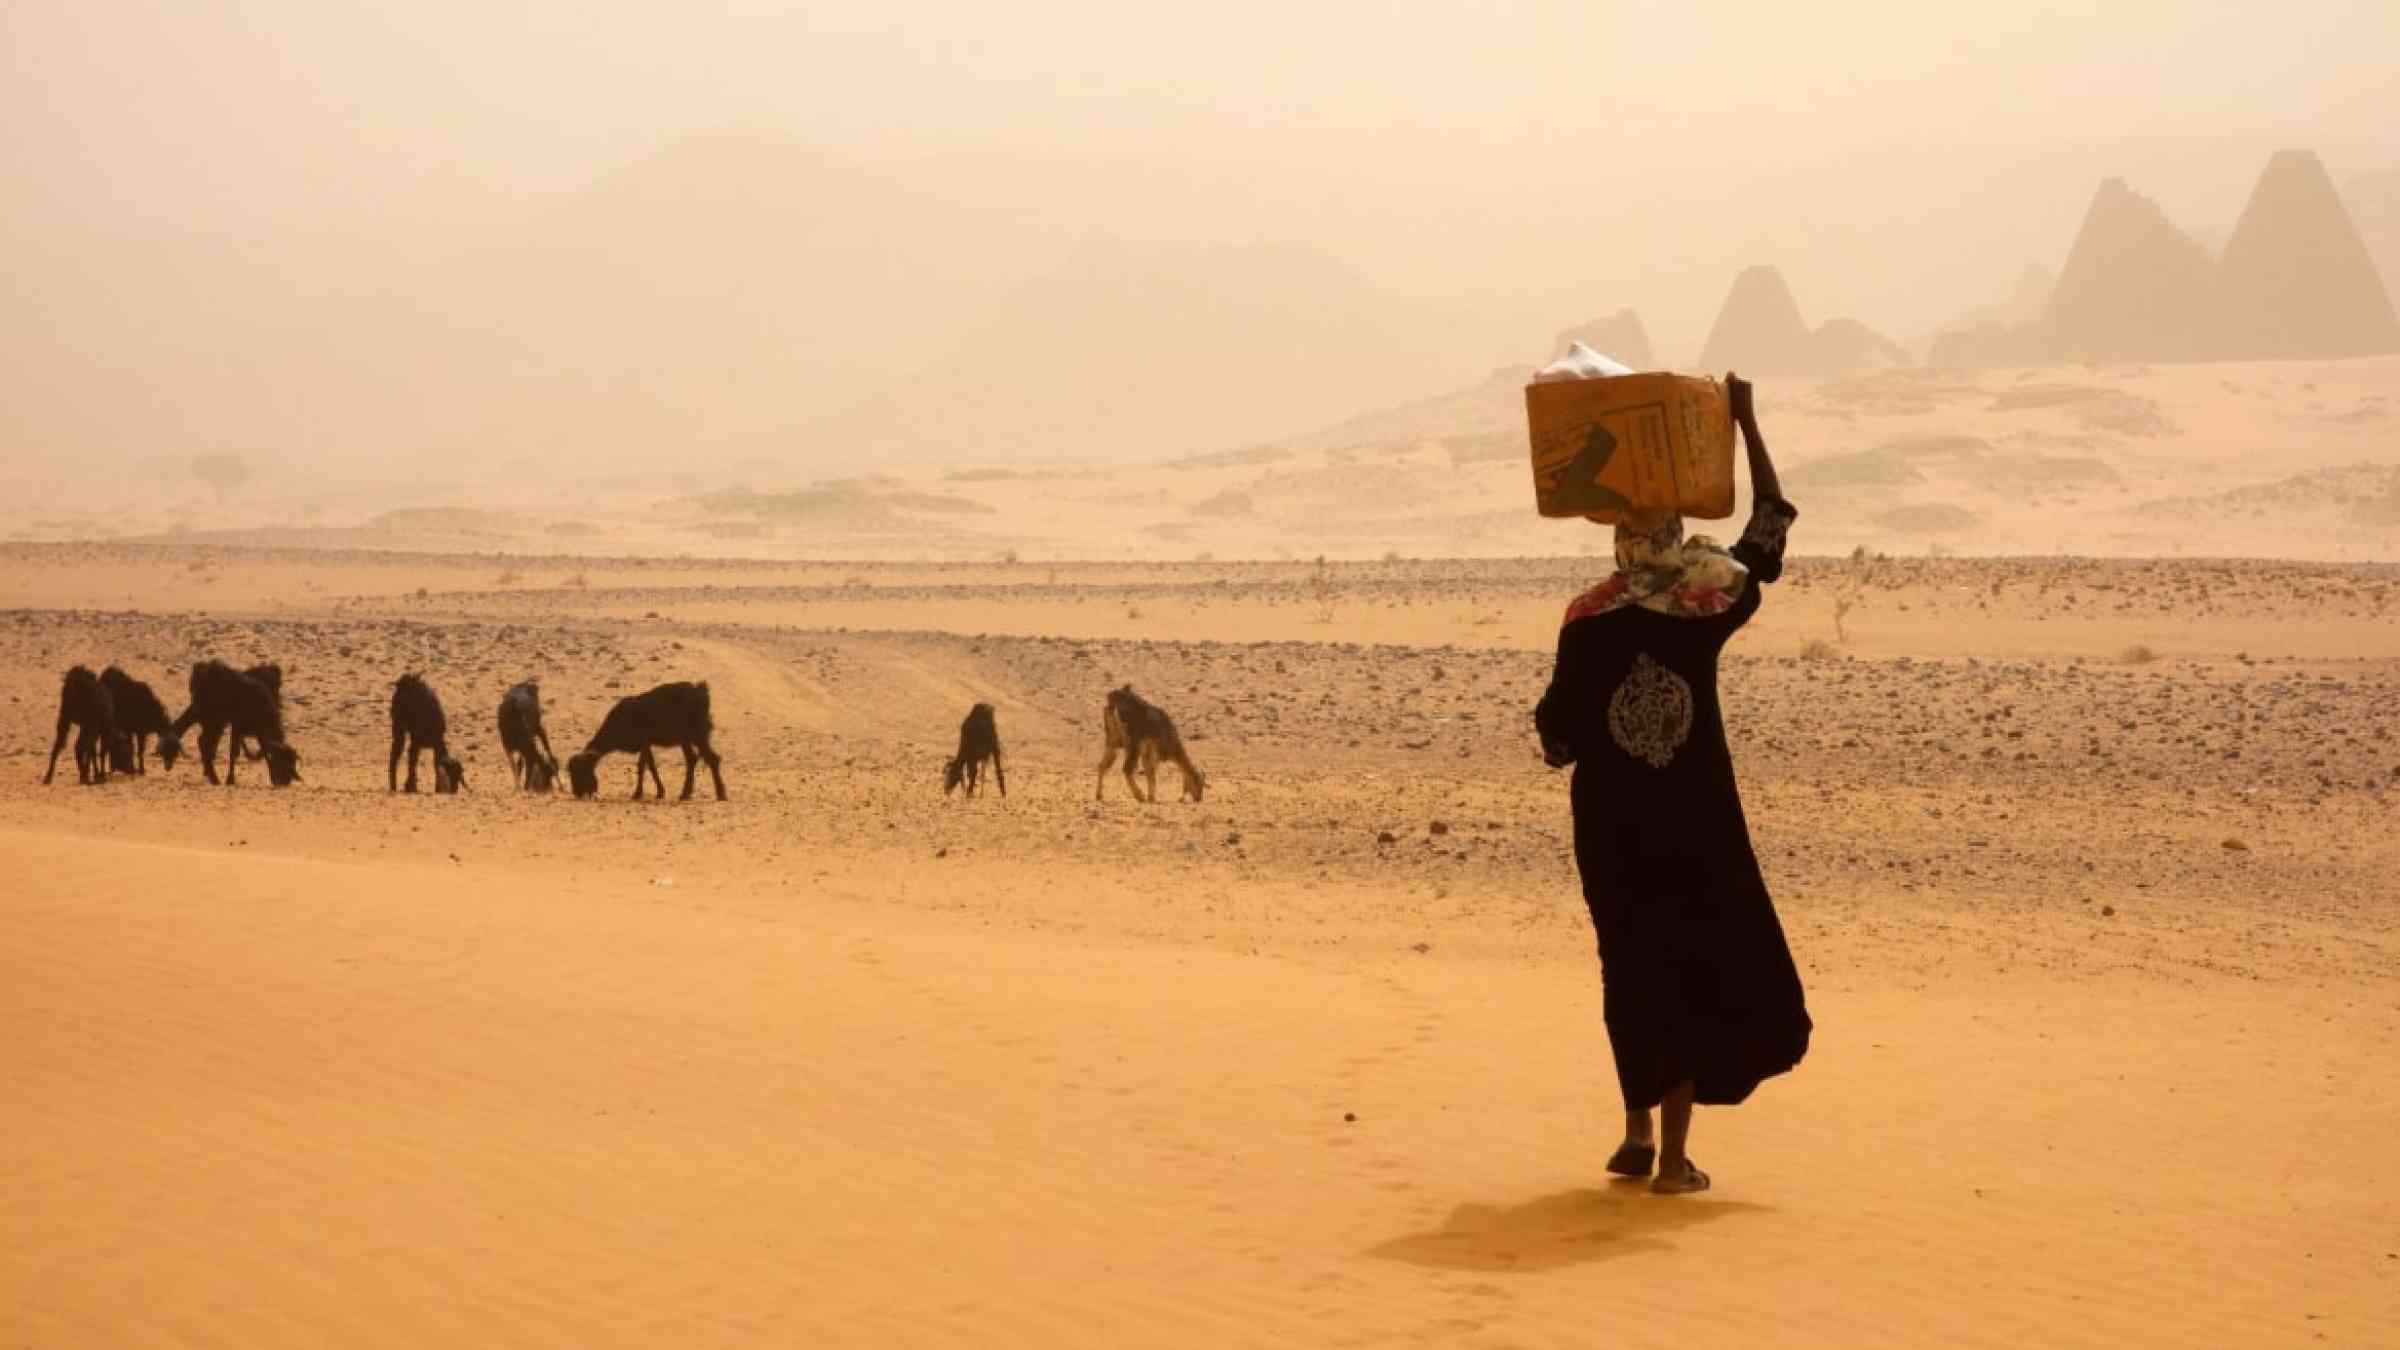 Woman carrying a basket walking through the sandy desert with her livestock.